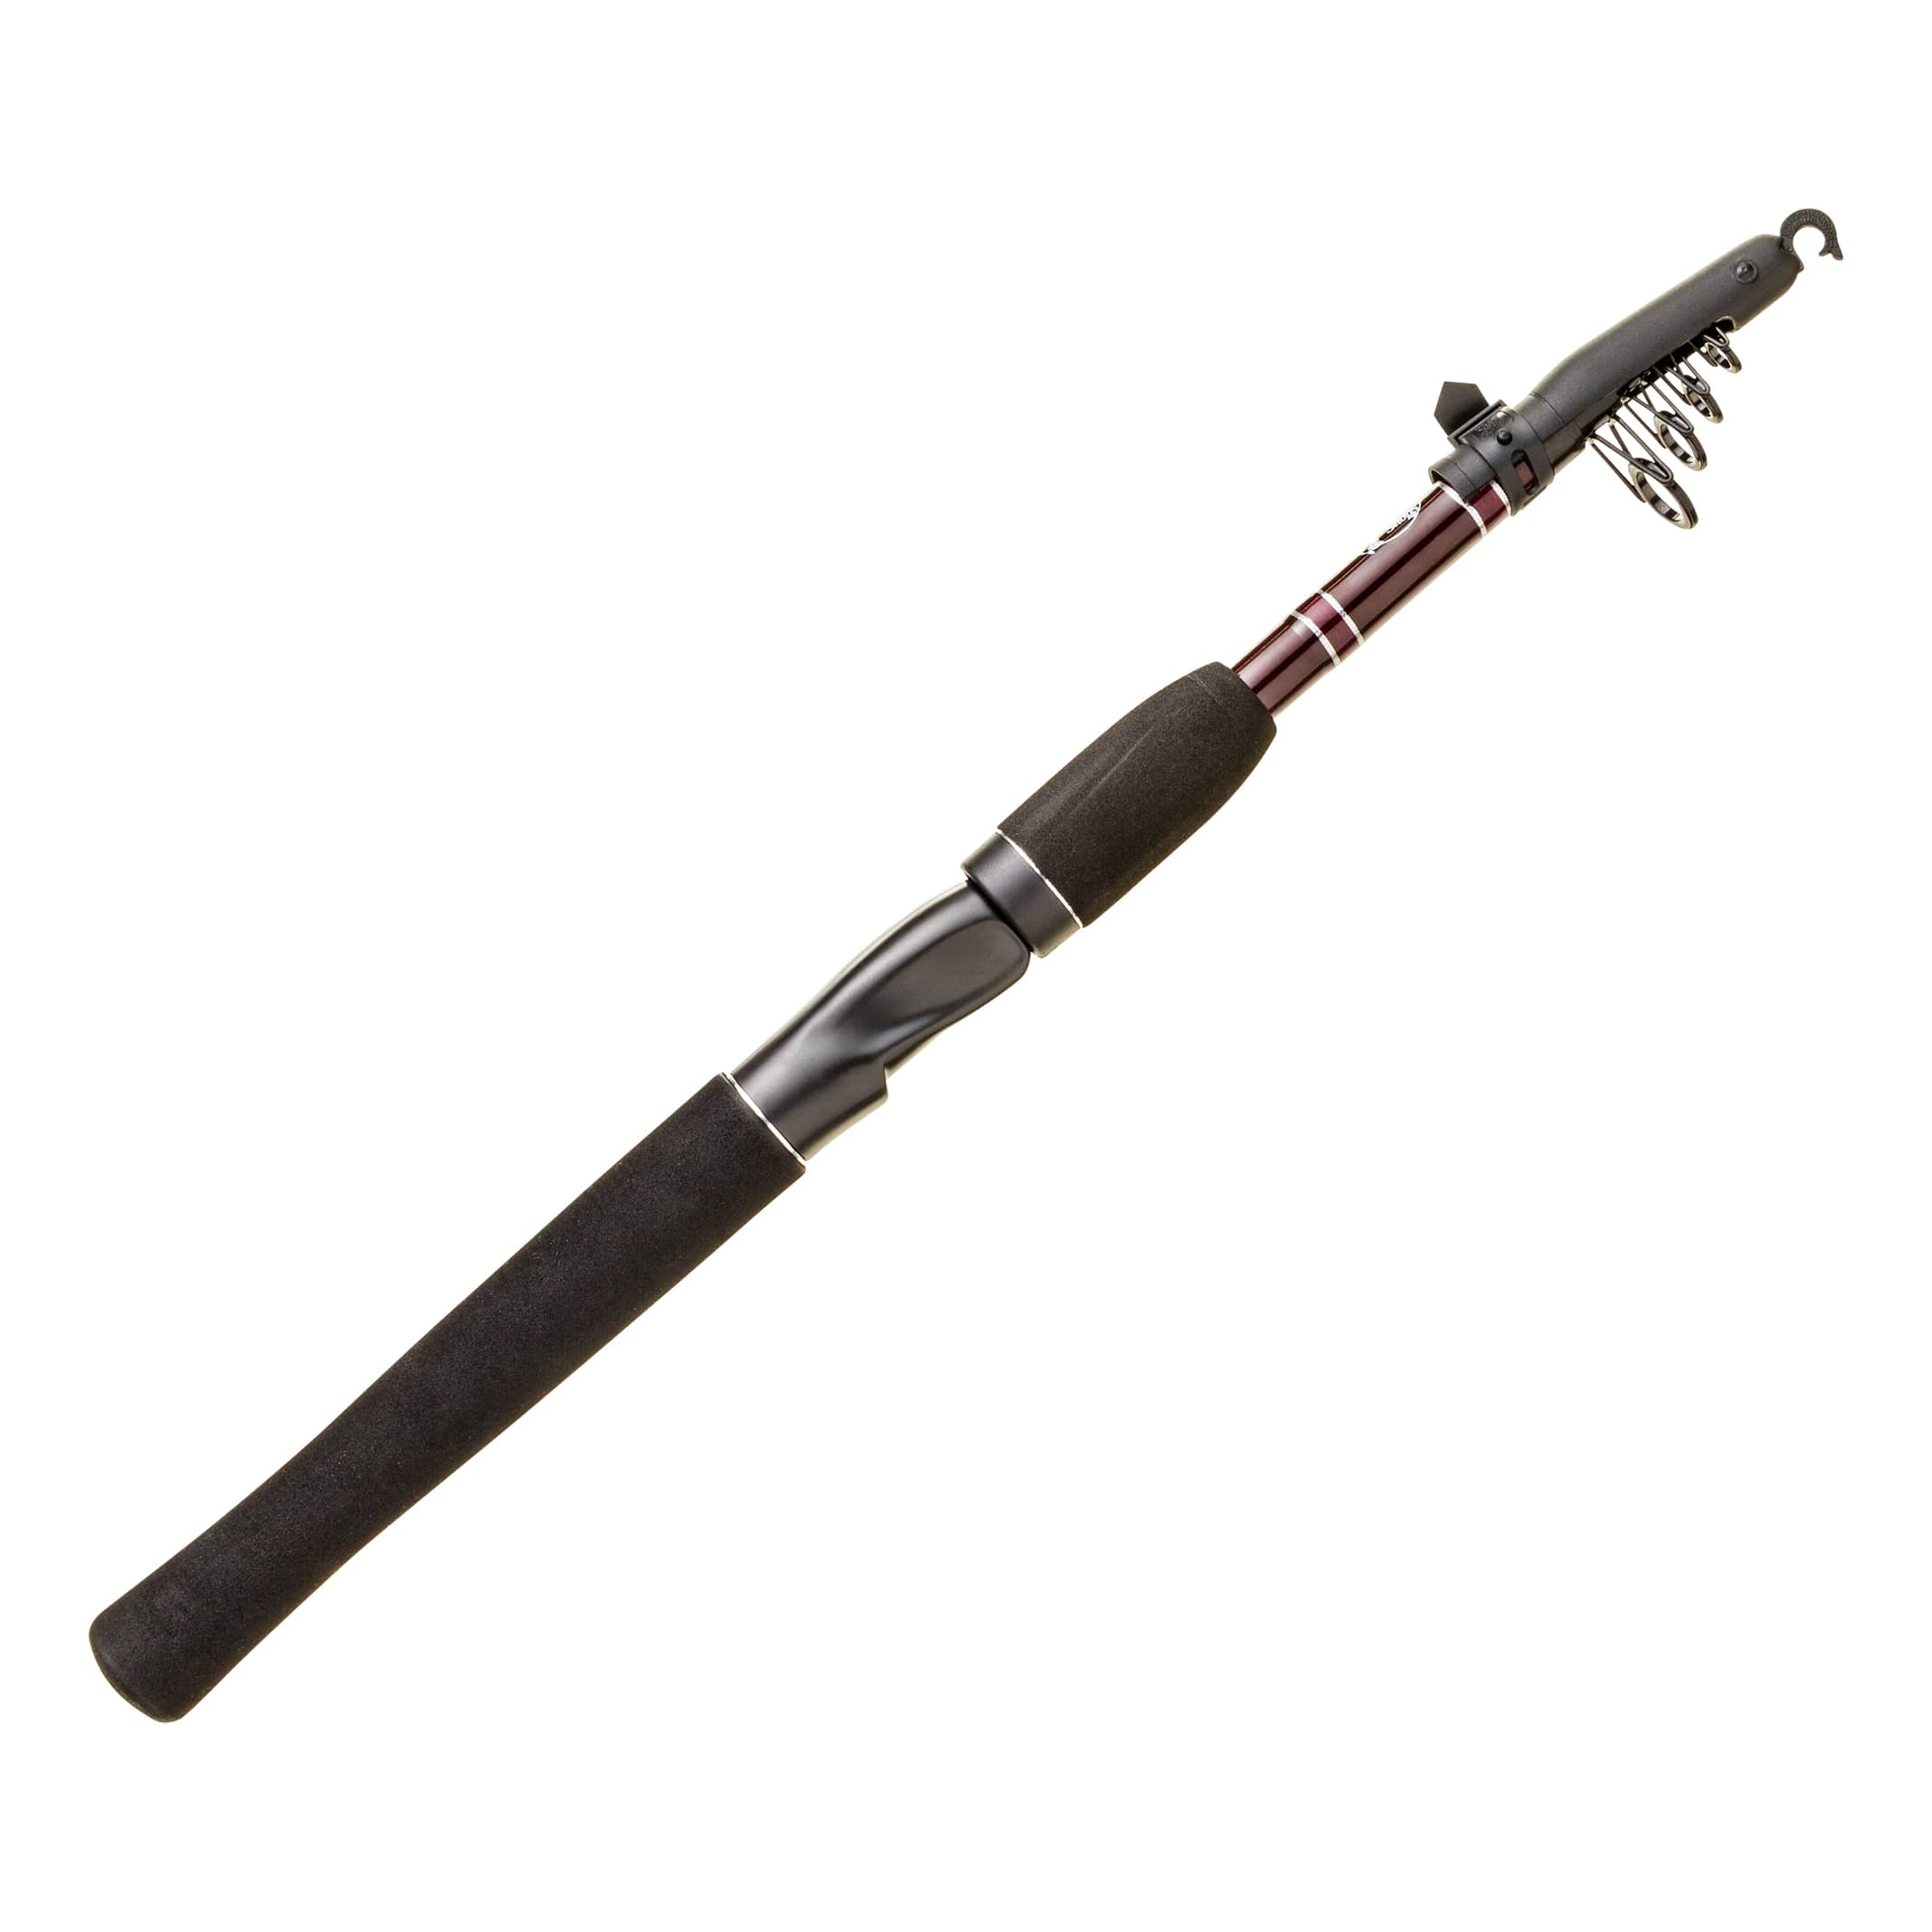 Multifunctional Durable Extend Portable Telescopic Fishing Rod